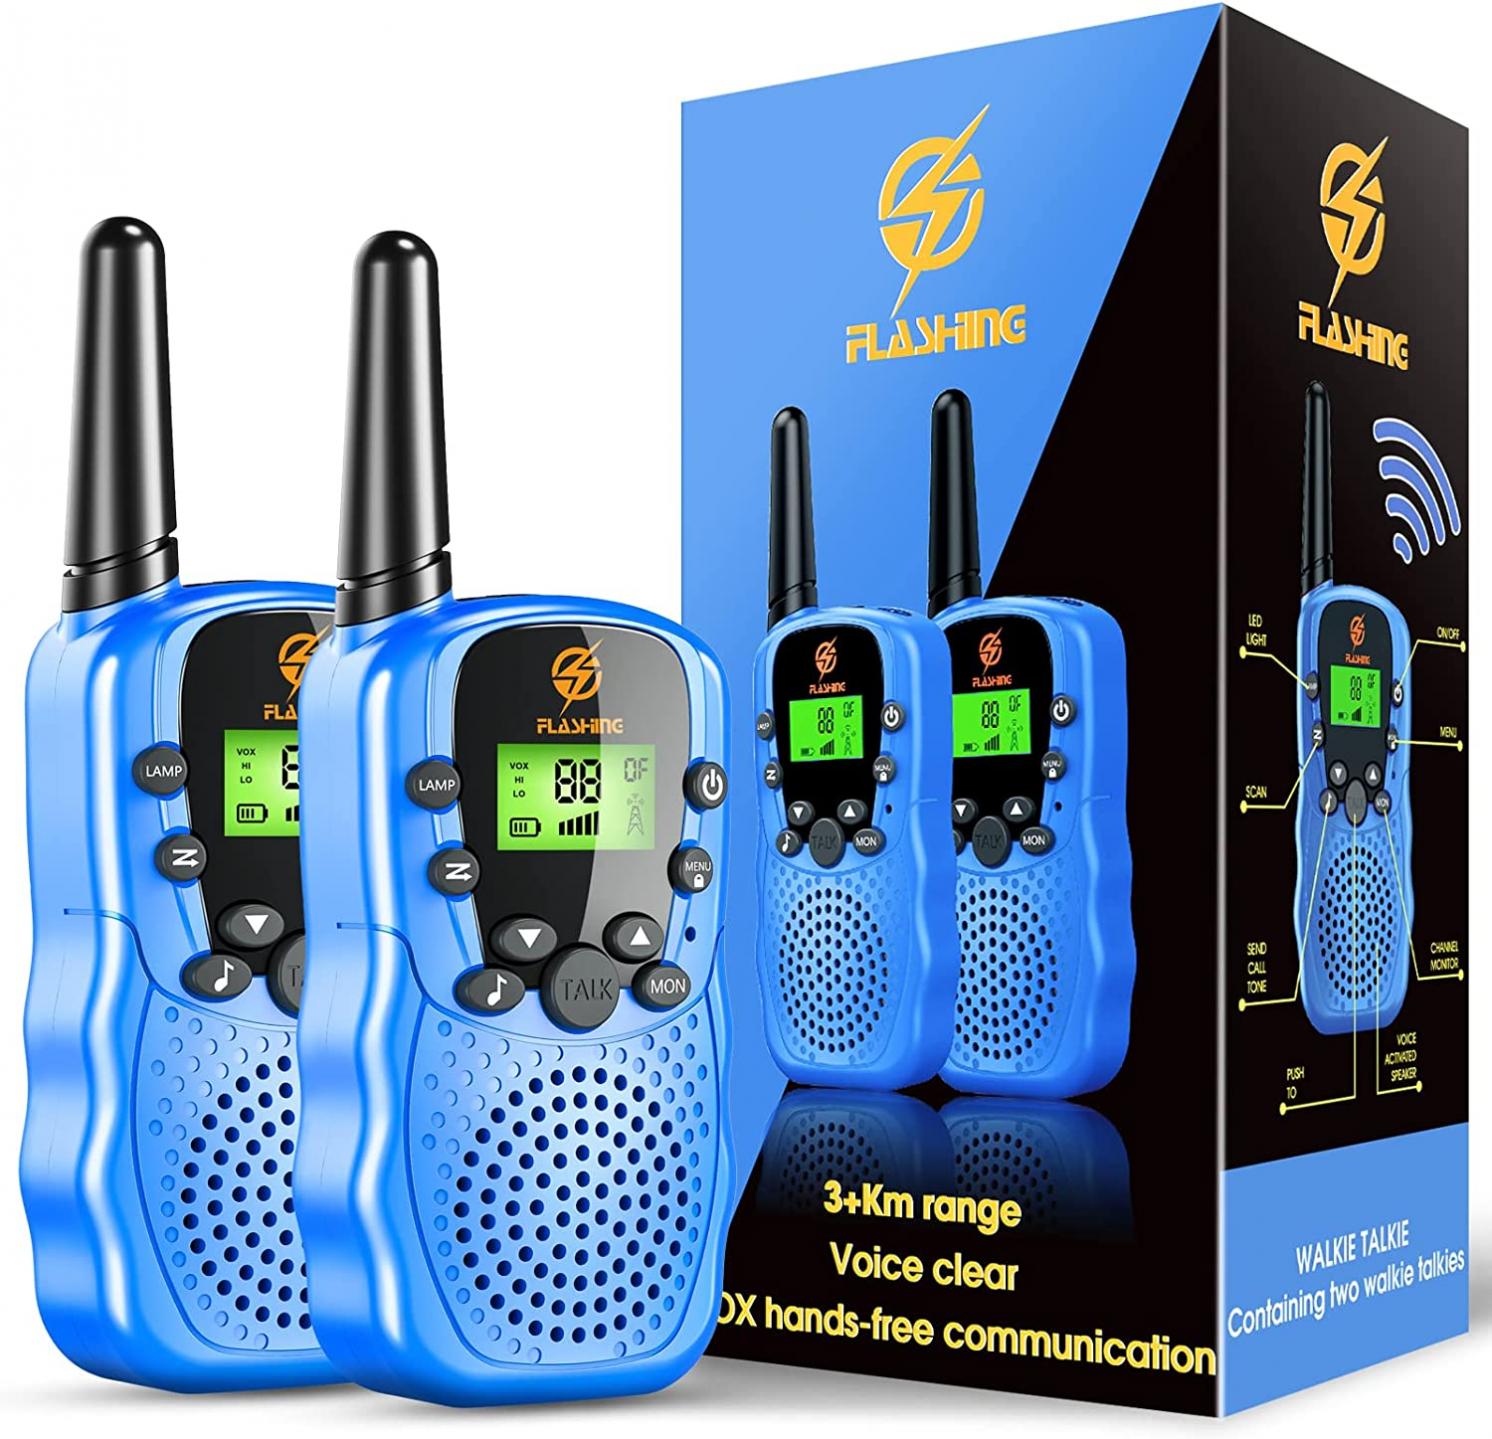 Walkie Talkies for Kids 2 Pack: Long Range Kids Blue Walkie Talkies for Boys 4-12 Christmas Birthday Gifts Toys for 3 4 5 6 7 8 9 Year Old Boys Kids Camping Outdoor Toys Stocking Stuffers for Kids